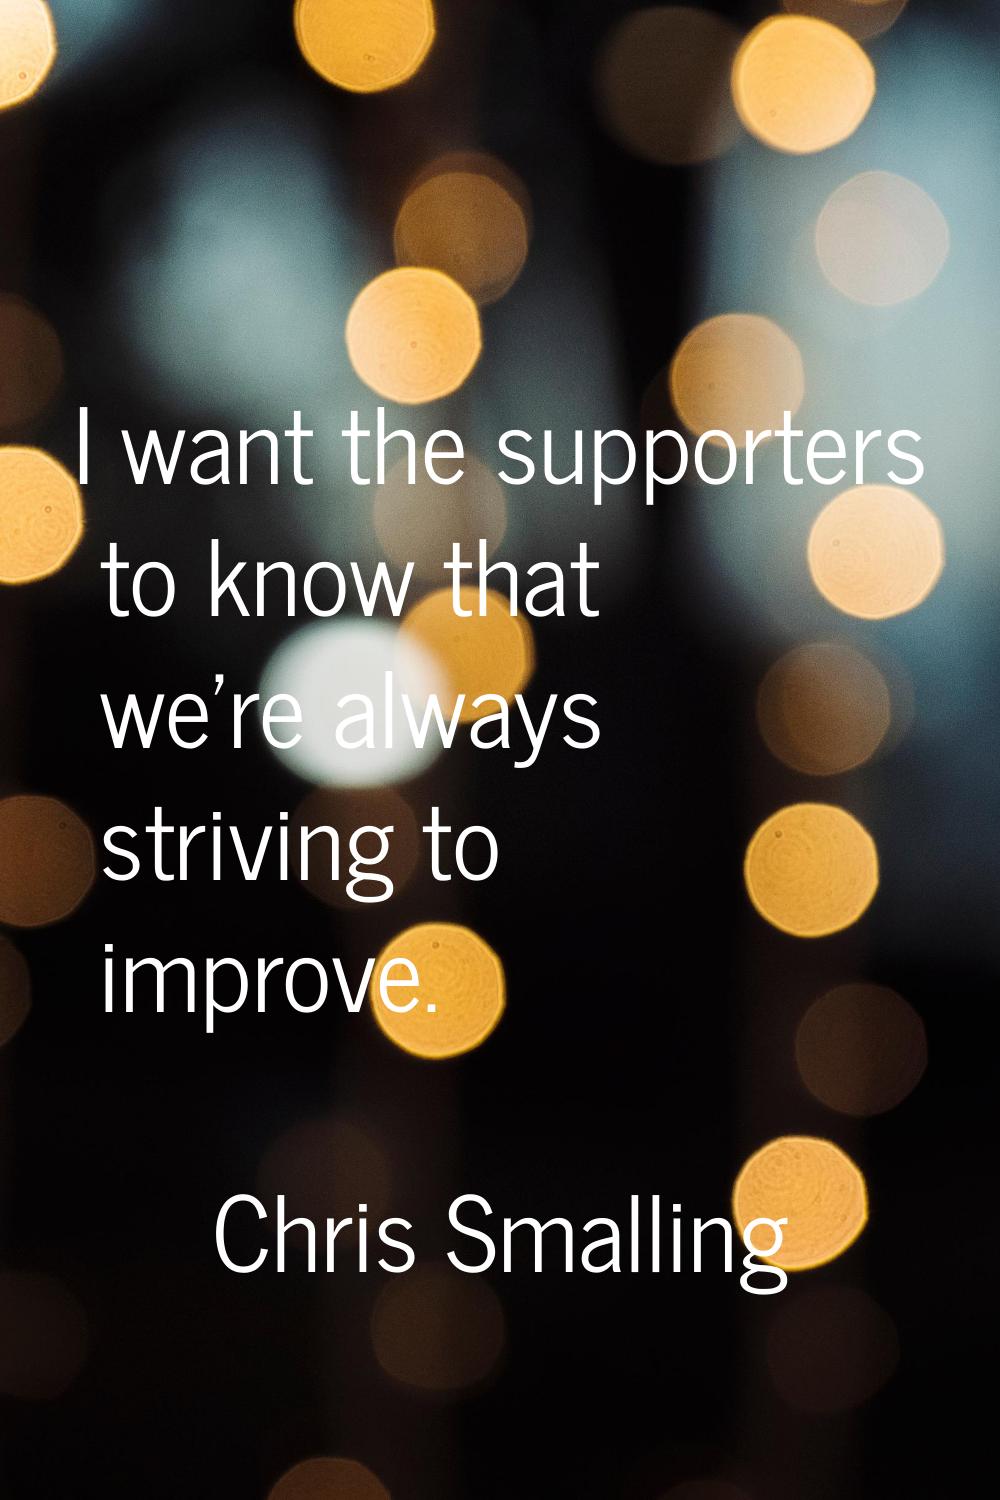 I want the supporters to know that we're always striving to improve.